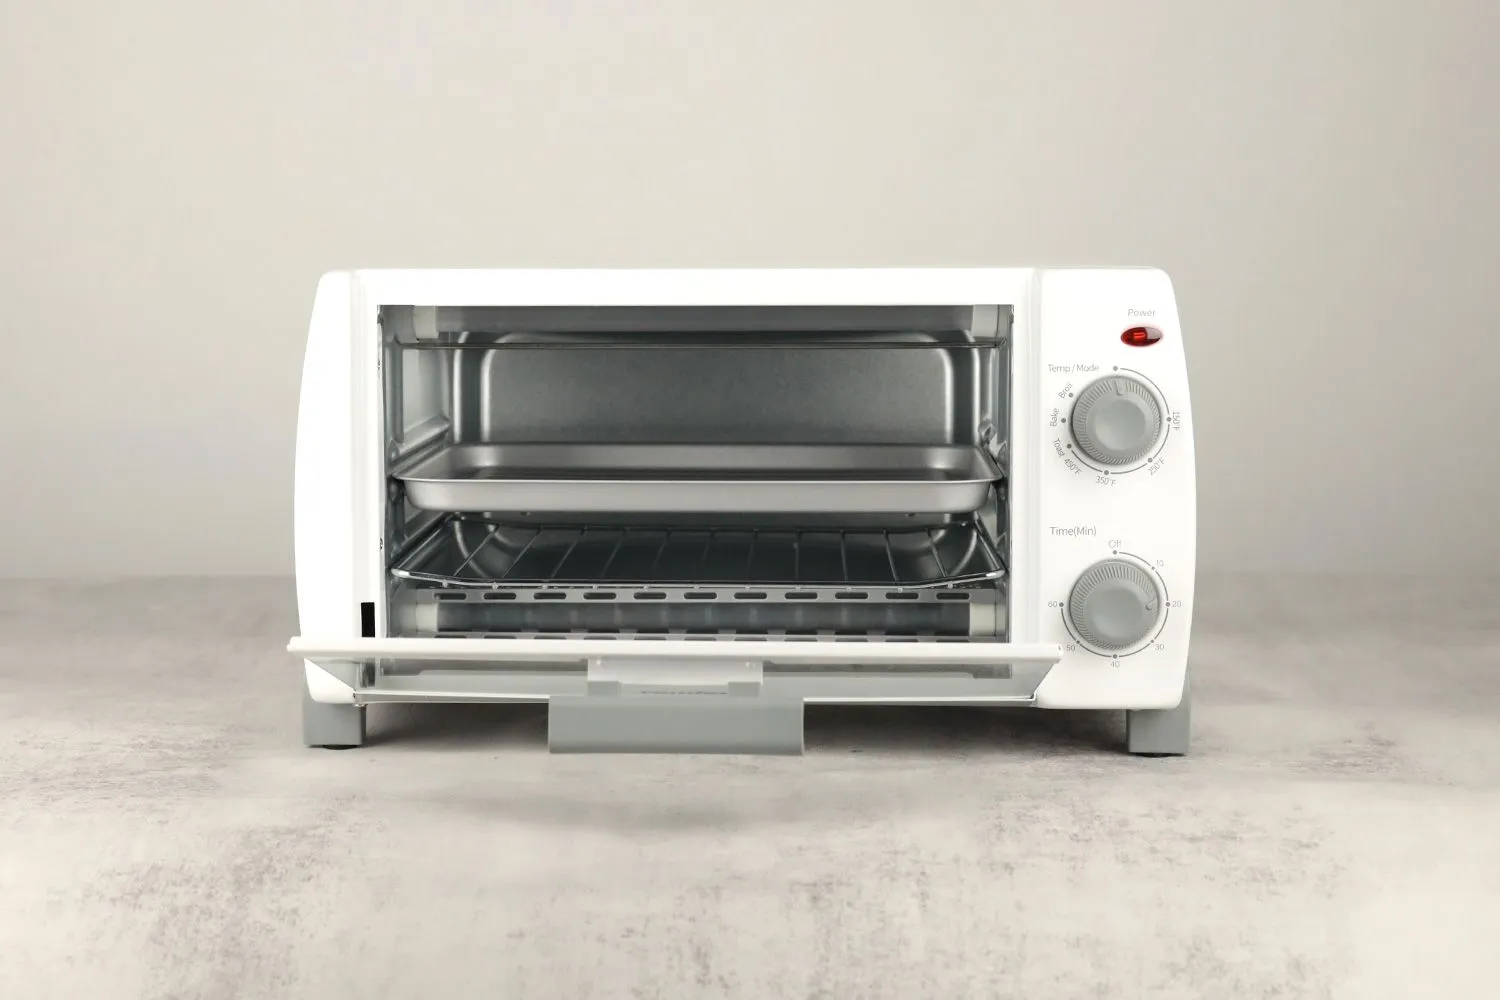 COMFEE CFO-BB101 vs Cuisinart TOA-60 Toaster Oven: To Invest in Performance  or Not